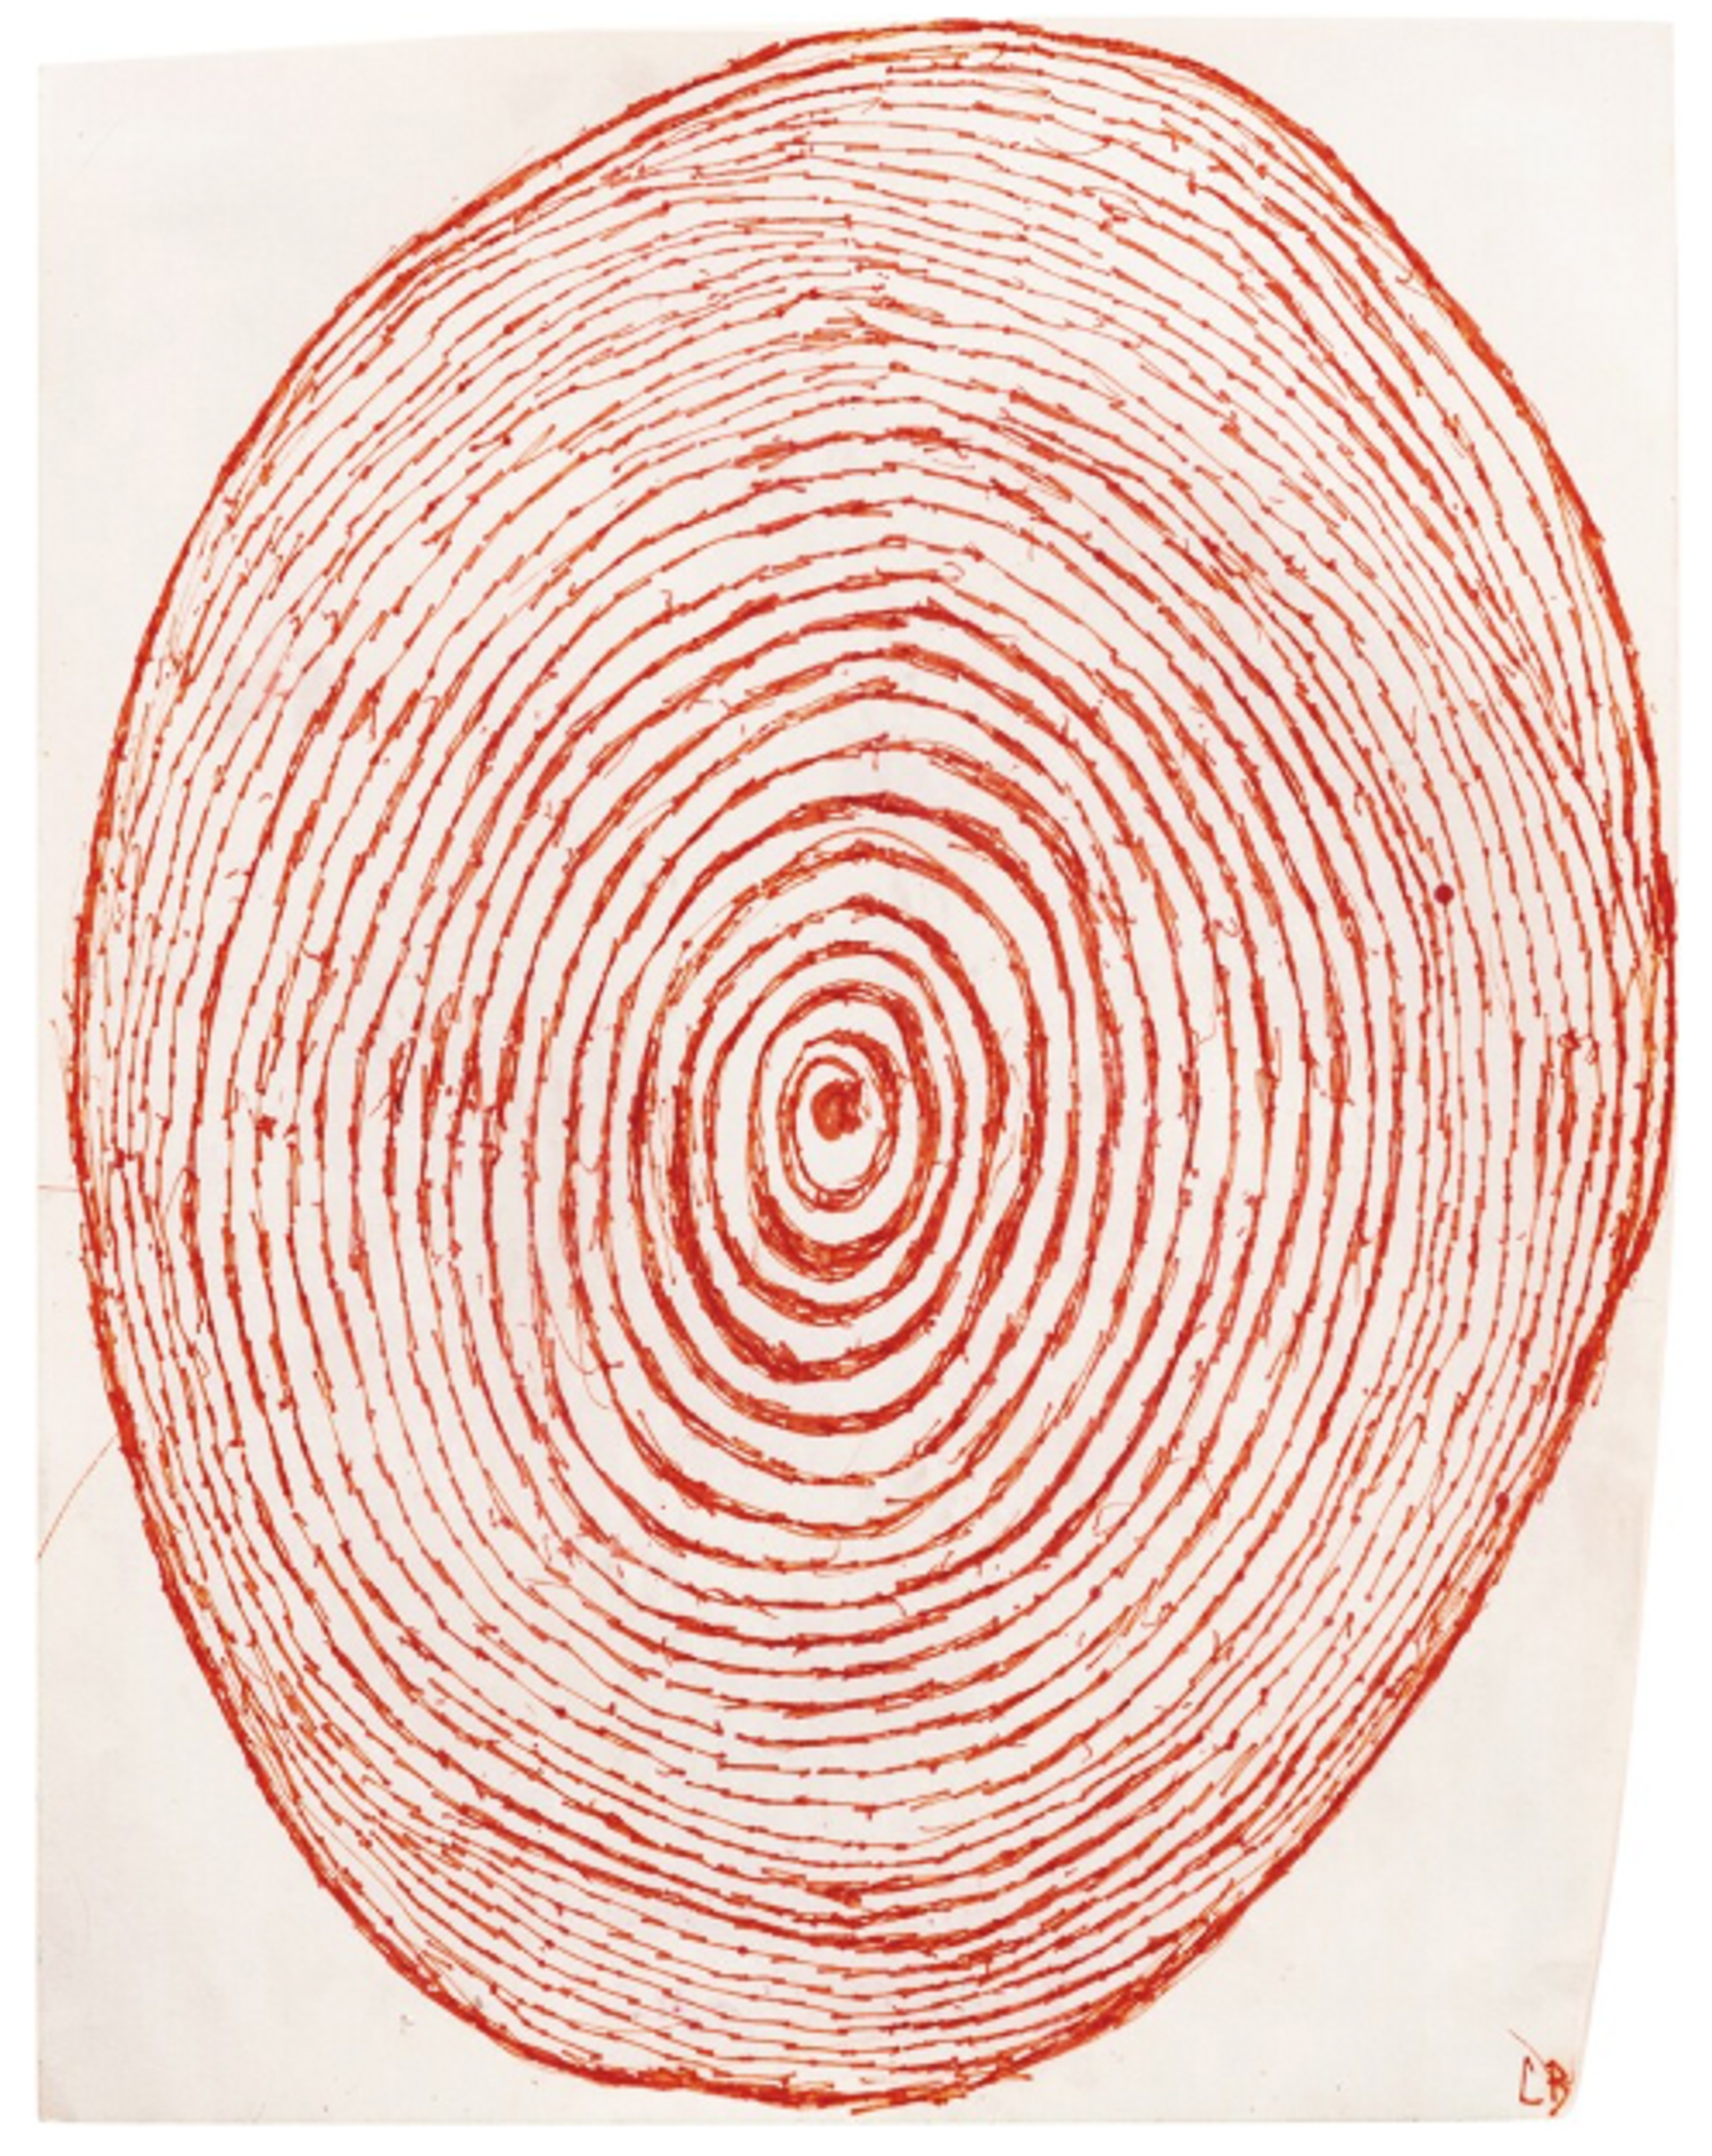 A red ink fingerprint pressed onto a print, showcasing detailed ridges and whorls. The artist's signature initial 'LB' is subtly written in the lower left corner.